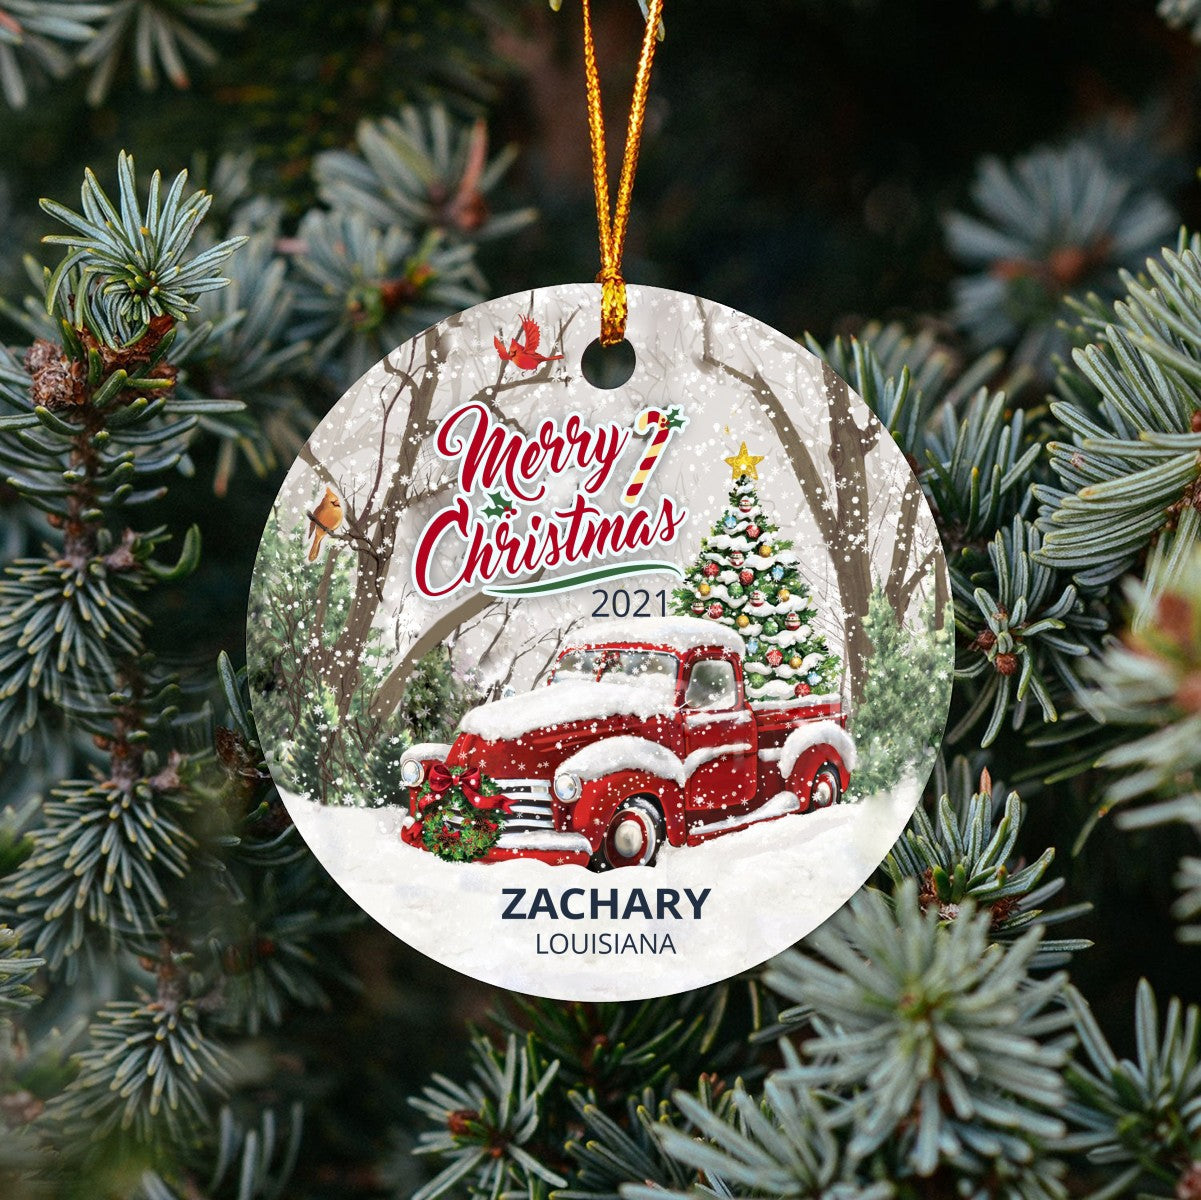 Christmas Tree Ornaments Zachary - Ornament With Name City, State Zachary Louisiana LA Ornament - Red Truck Xmas Ornaments 3'' Plastic Gift For Family, Friend And Housewarming